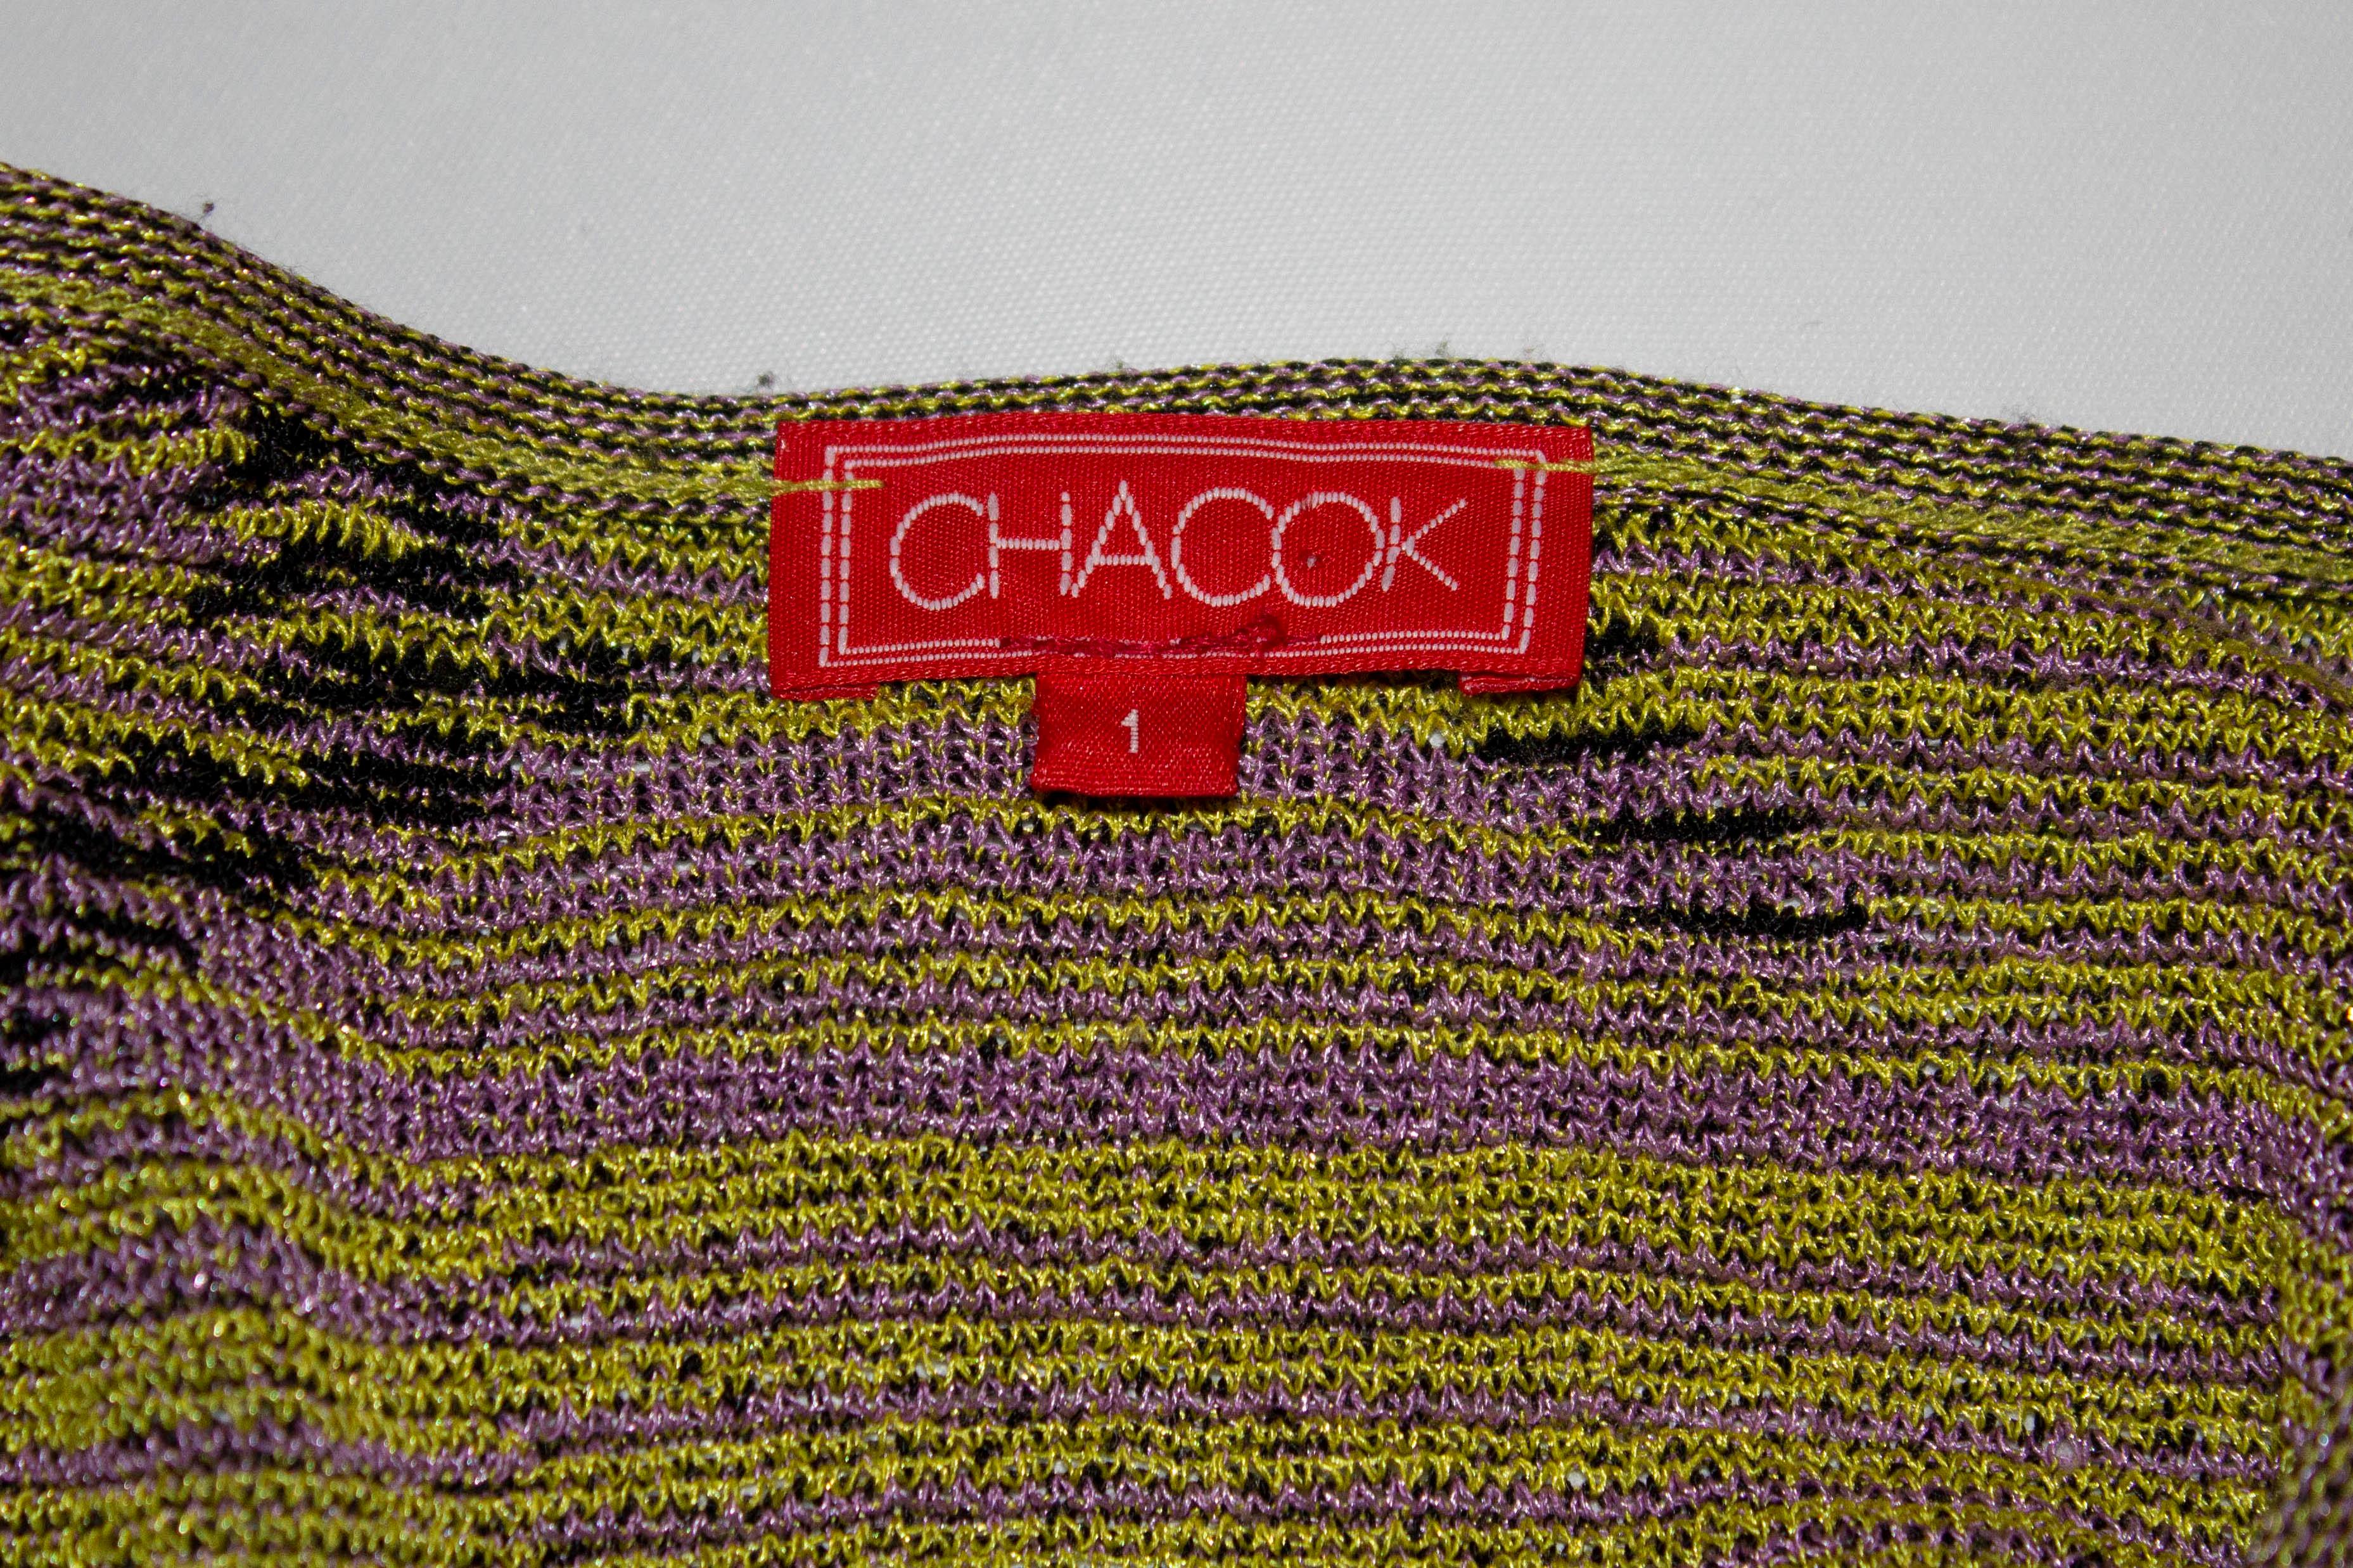 Women's Chacok V Neck Jumper and Matching Scarf For Sale